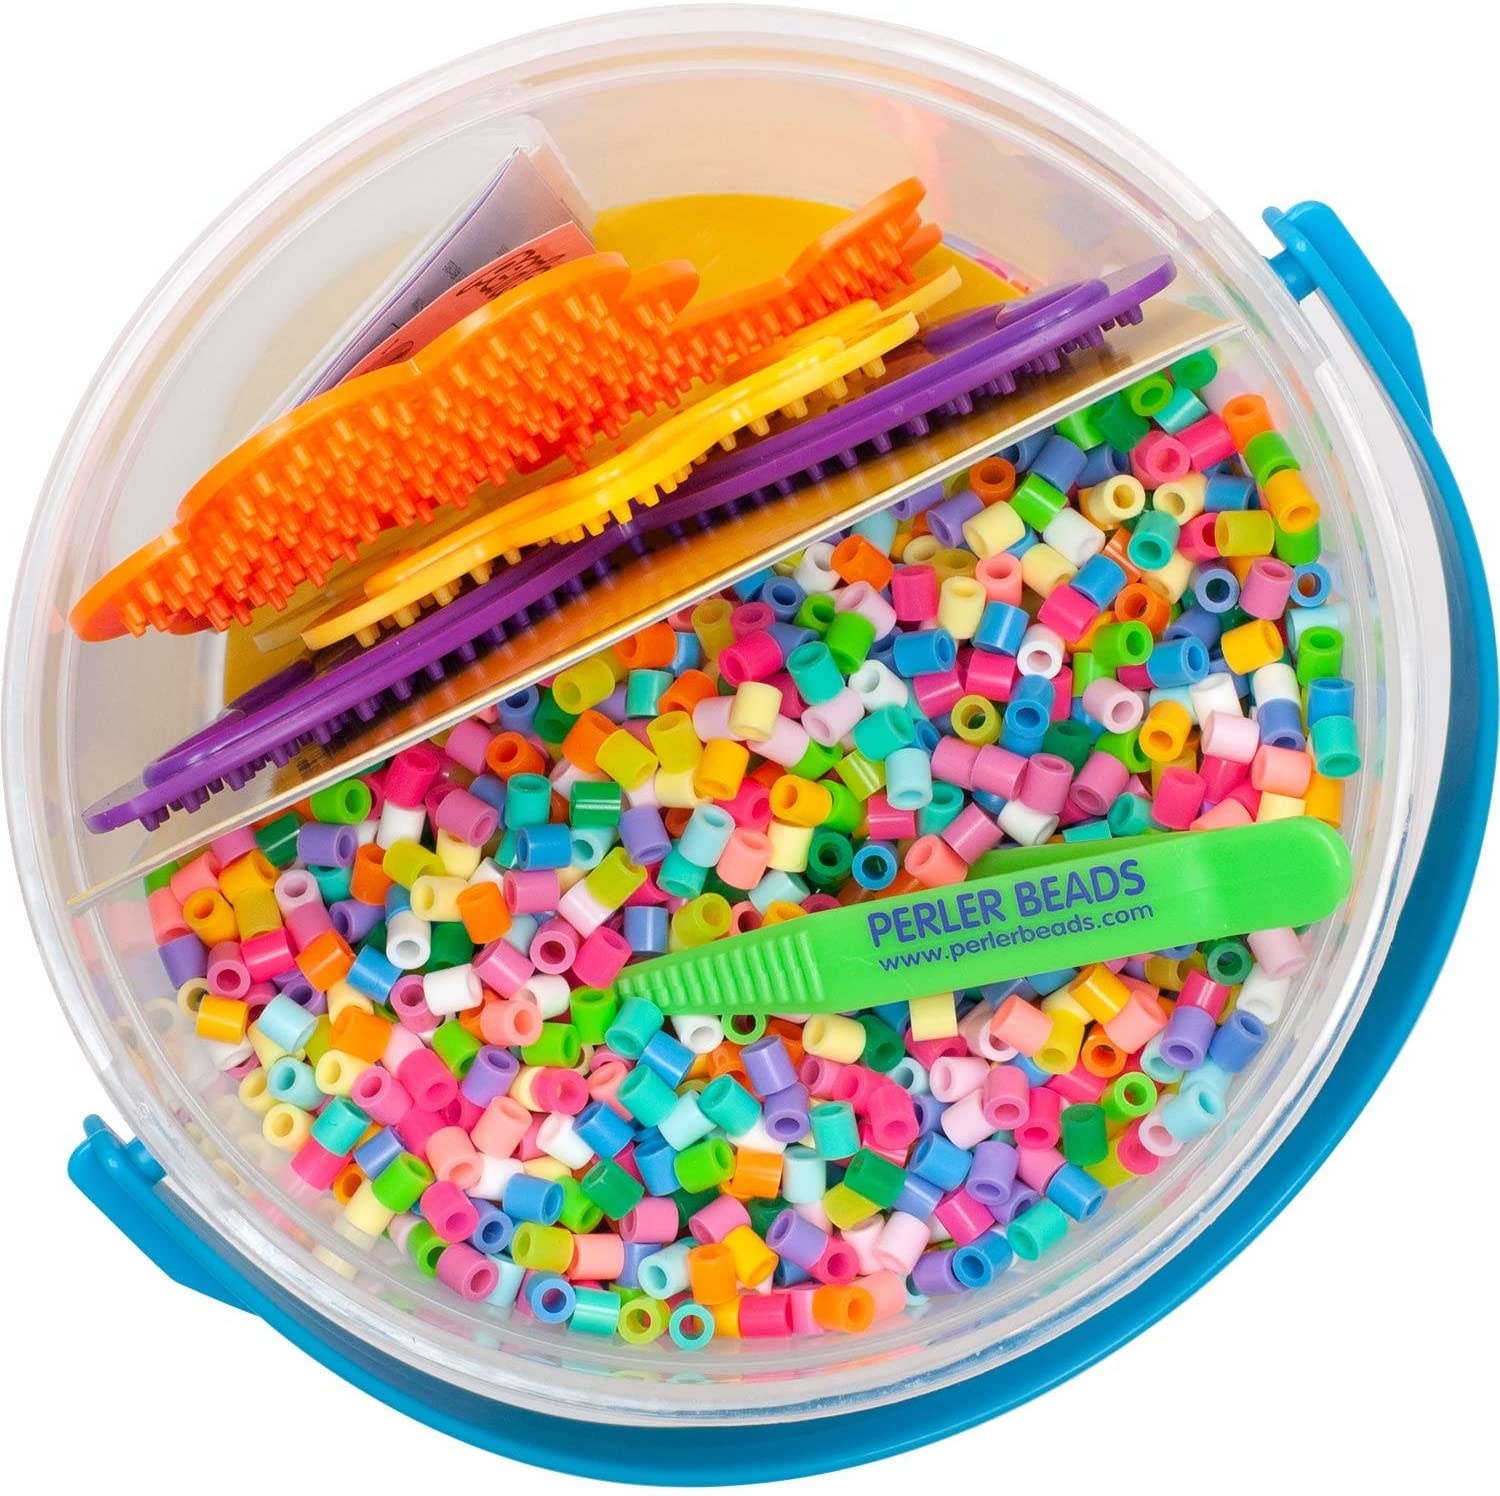 Top down view of open Perler bead bucket filled with multi-colored beads and boards